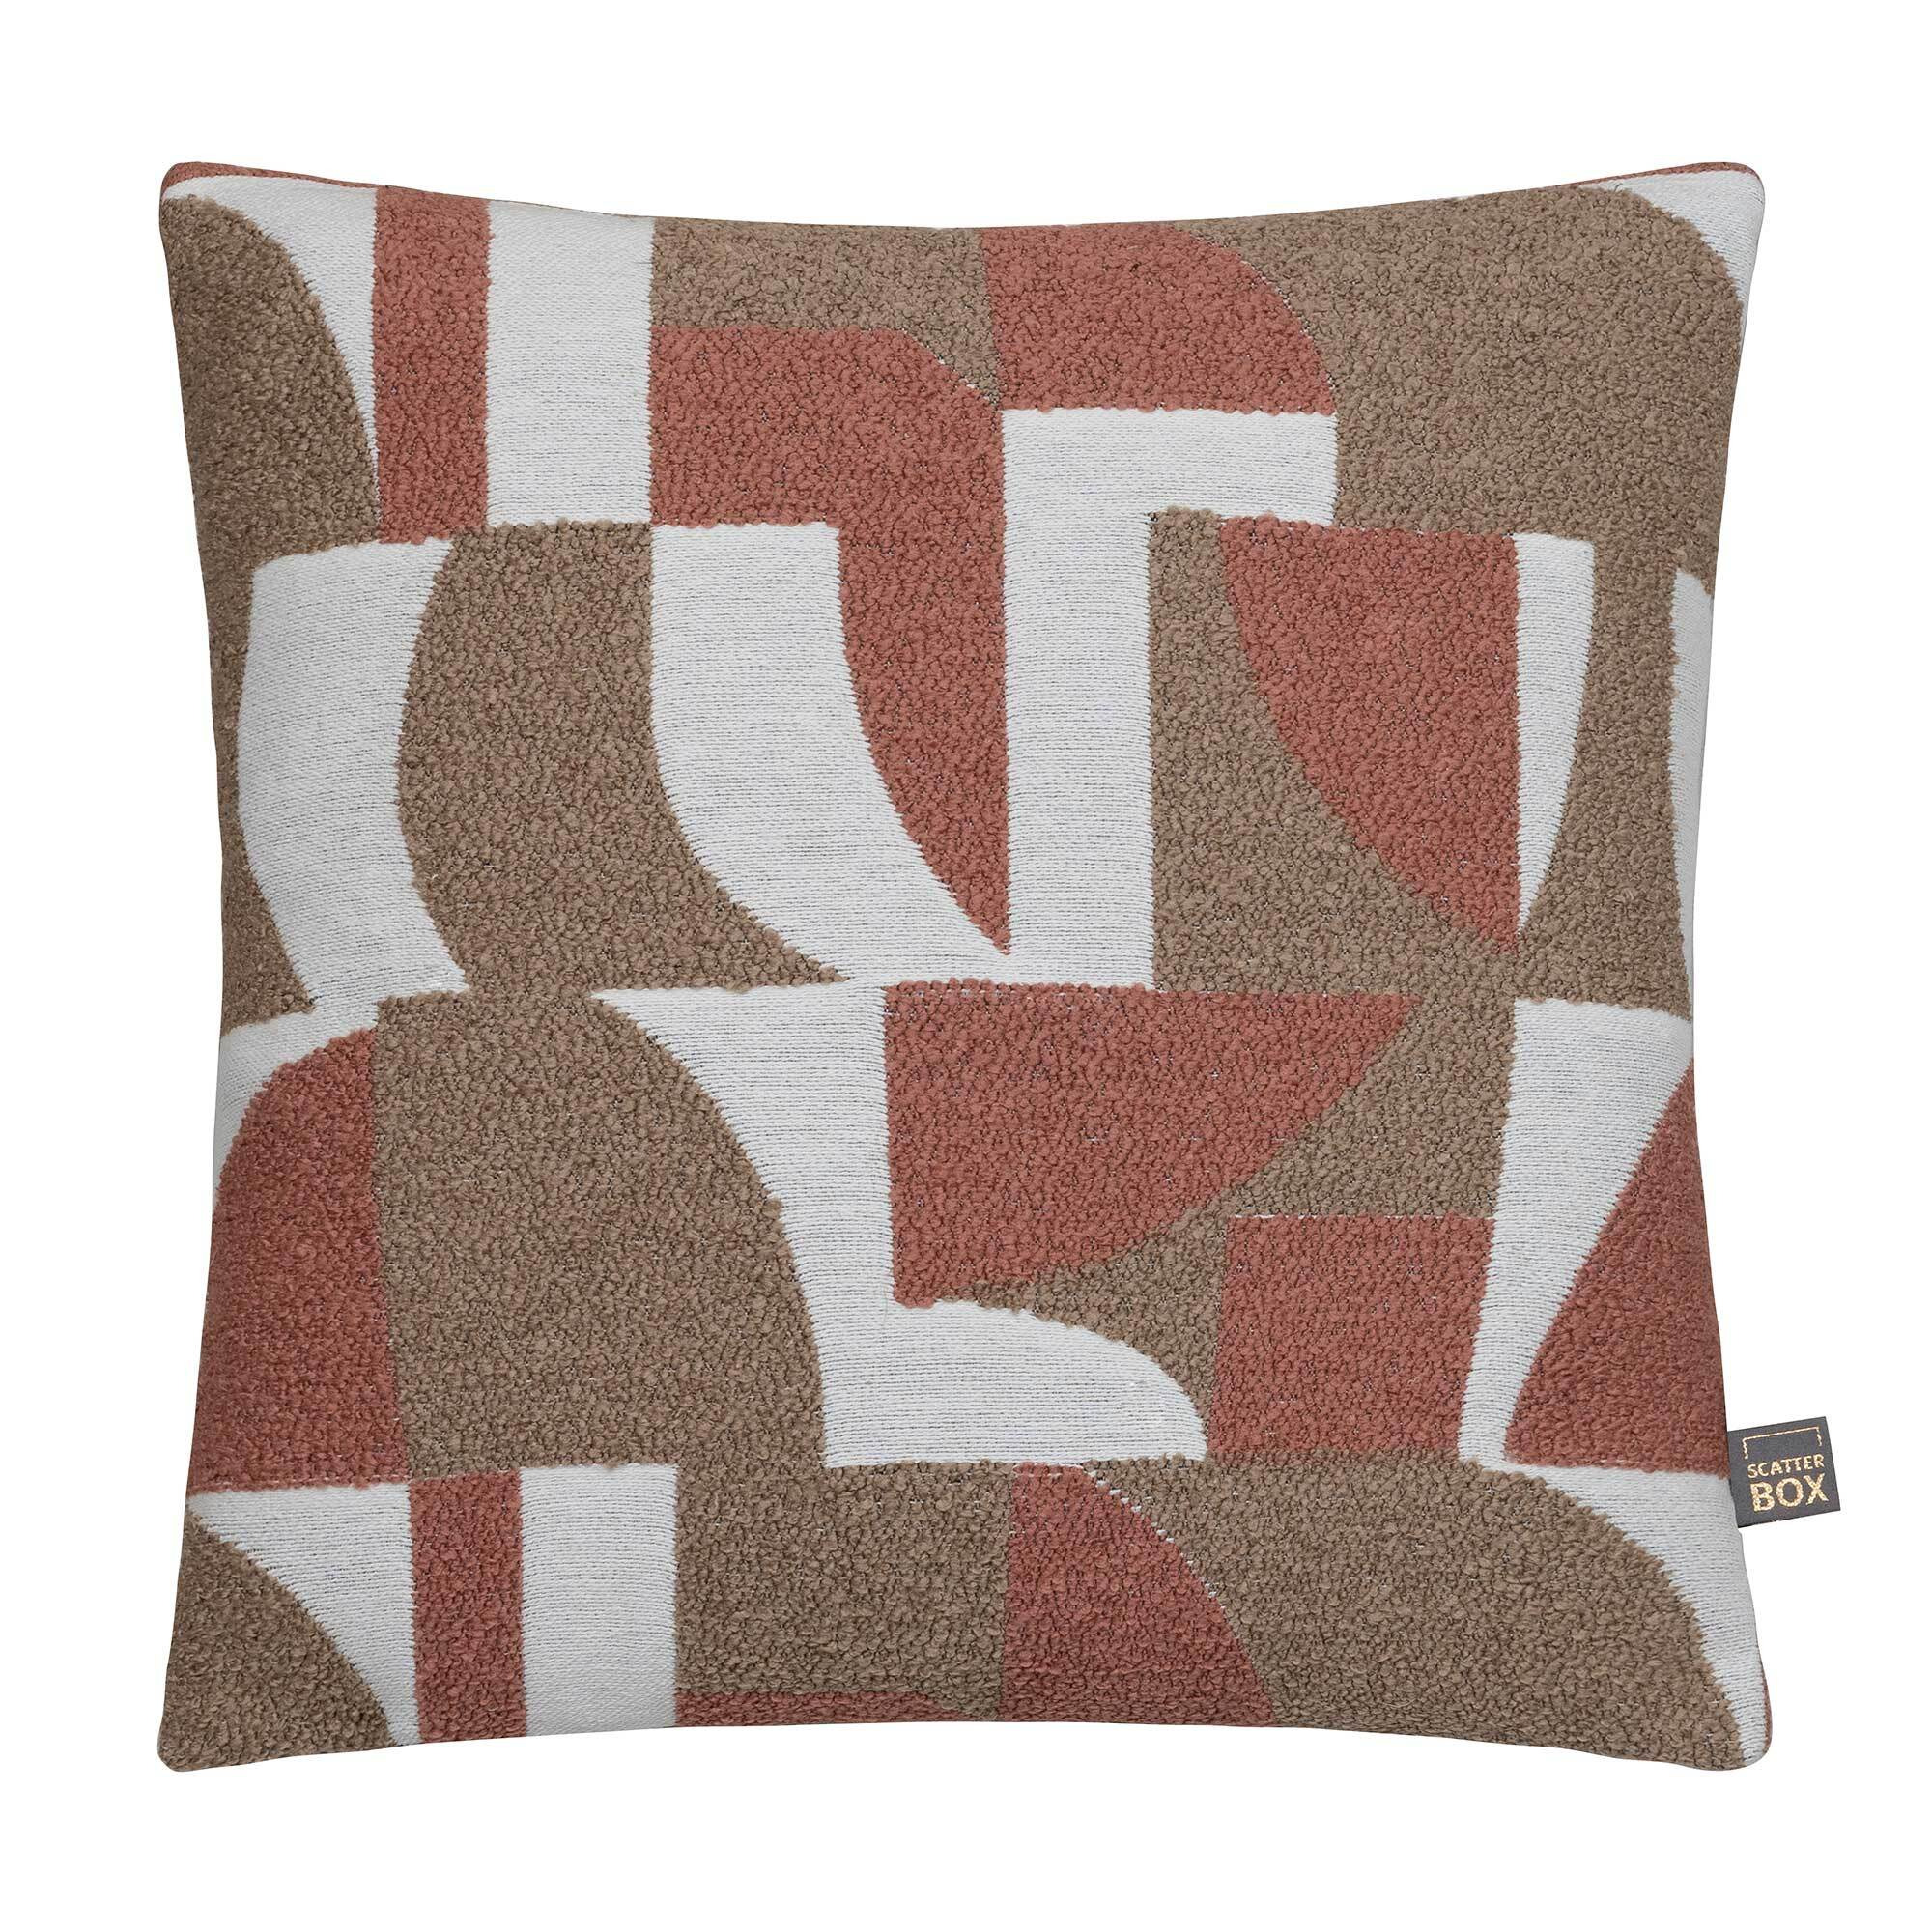 Geo Rust Cushion 43X43, Square, Neutral Polyester - Barker & Stonehouse - image 1